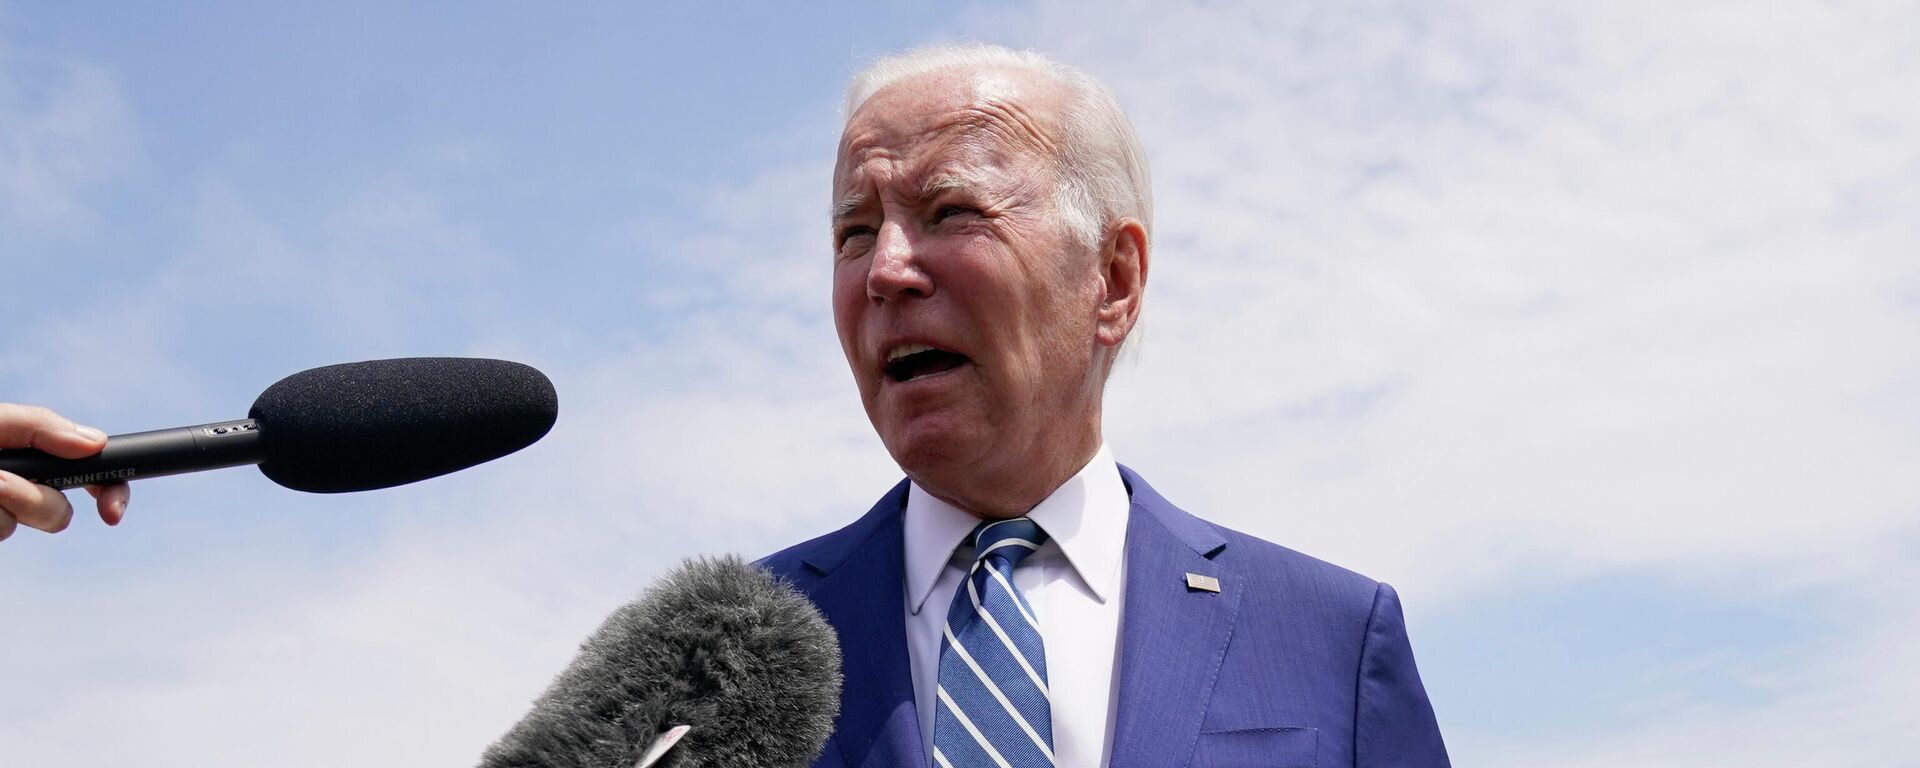 President Joe Biden speaks to reporters before he boards Air Force One for a trip to Los Angeles to attend the Summit of the Americas, Wednesday, June 8, 2022, at Andrews Air Force Base, Md. - Sputnik International, 1920, 09.06.2022